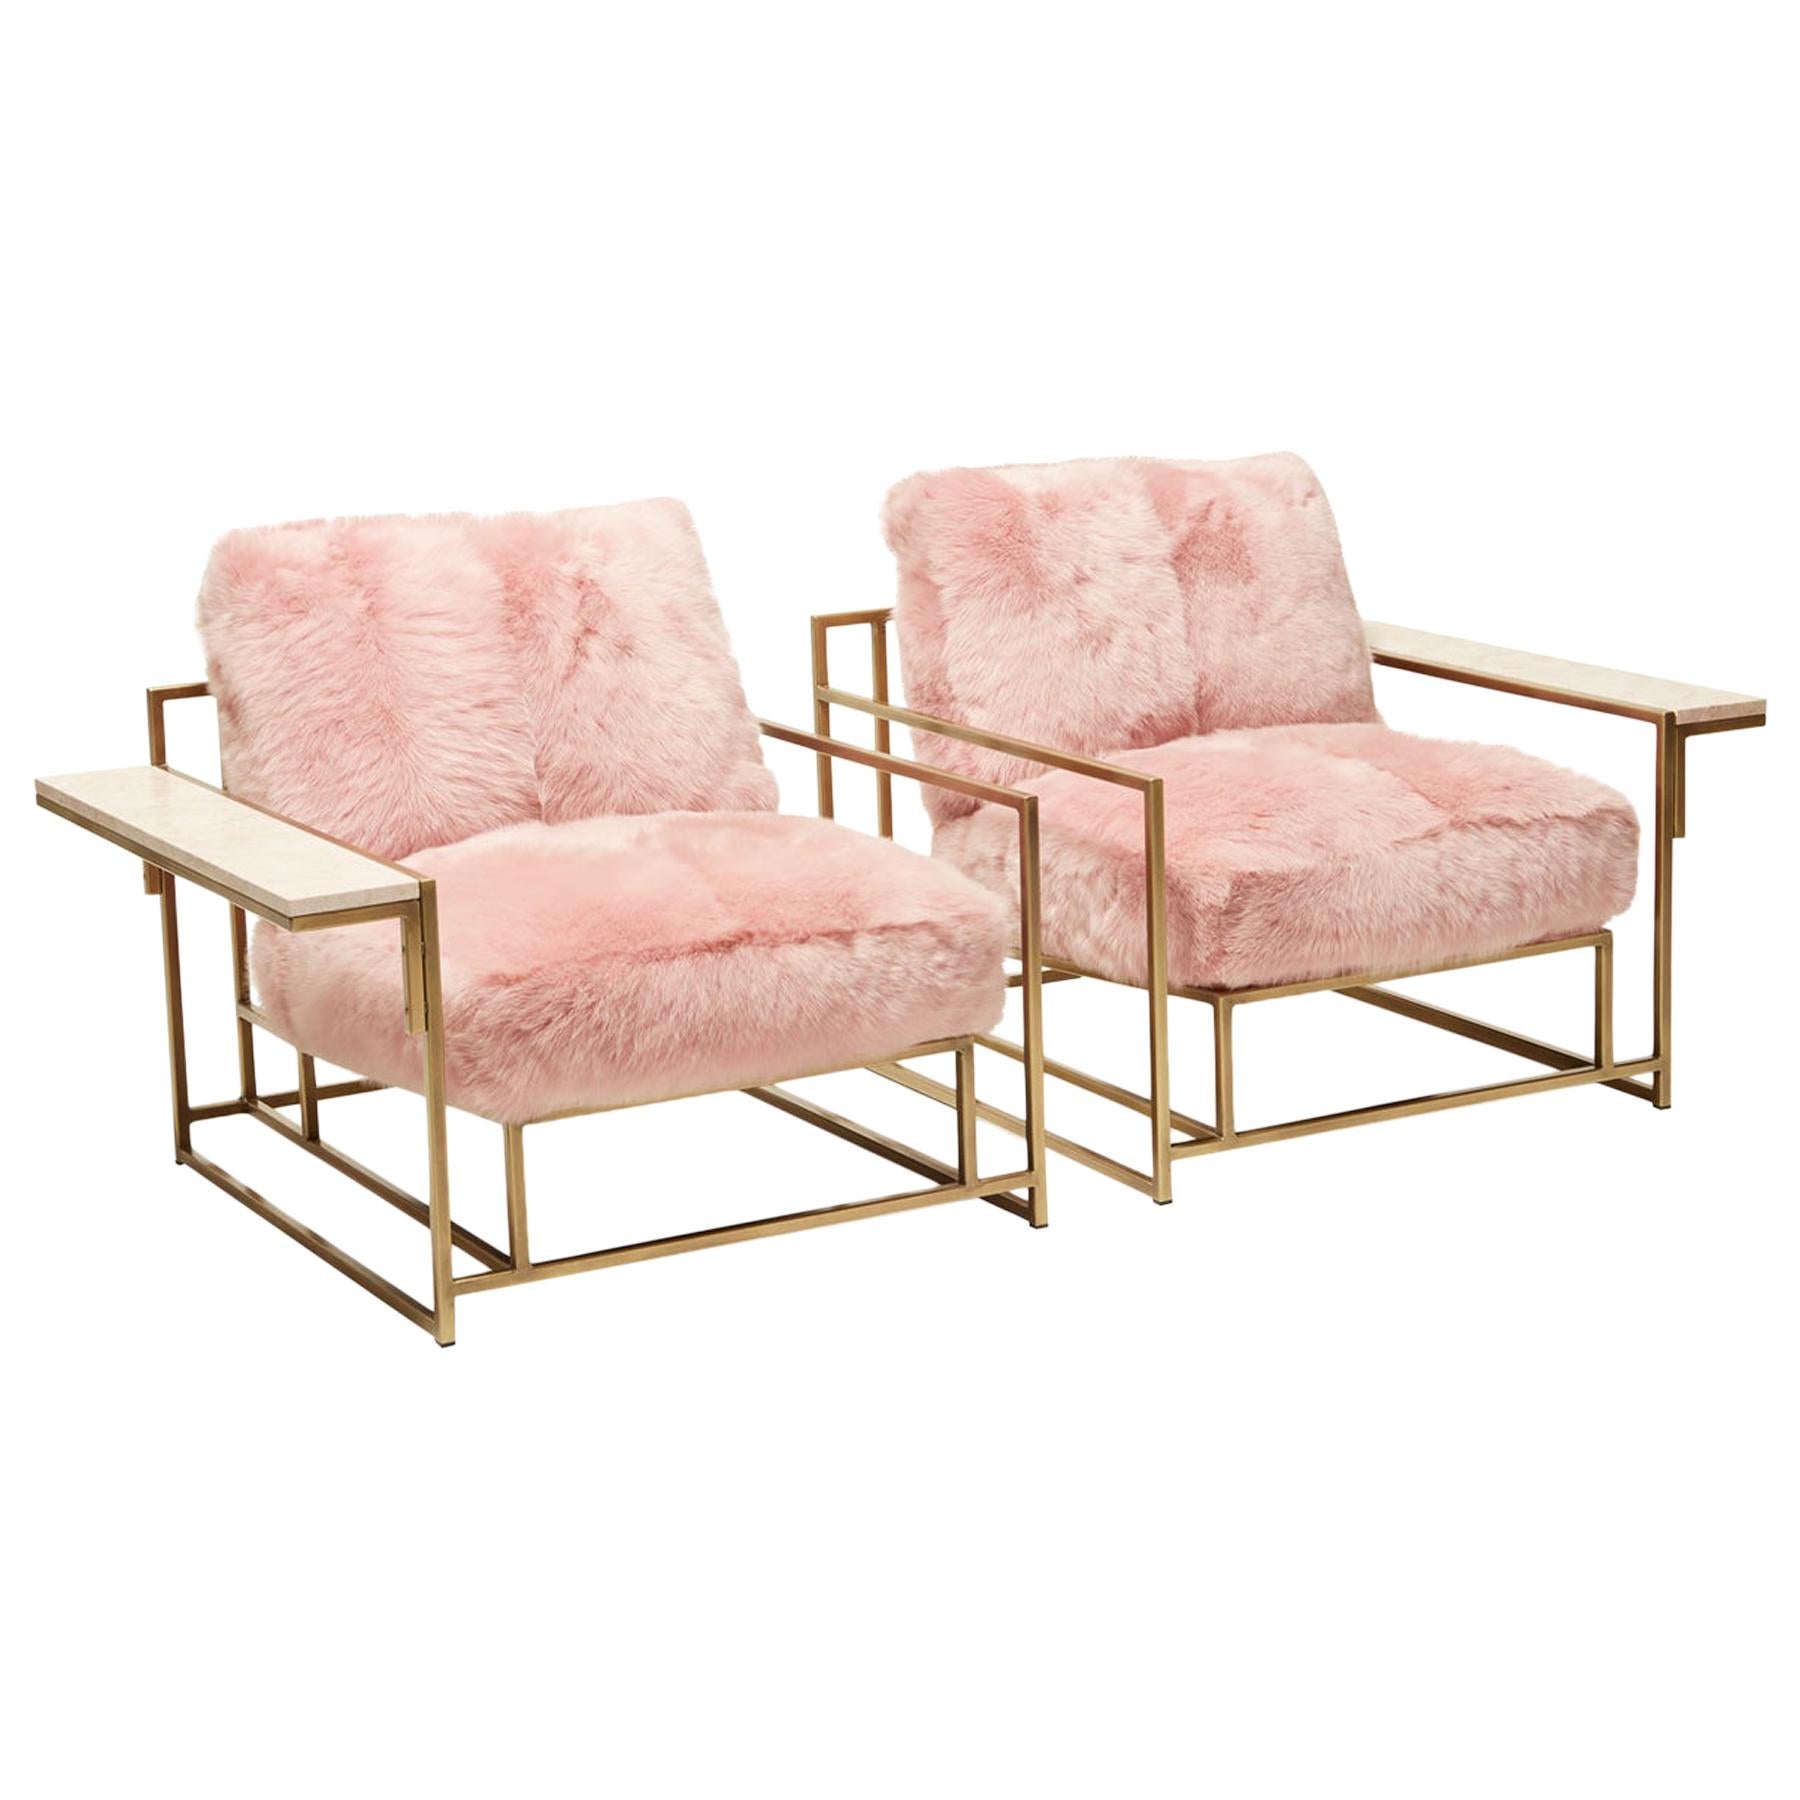 Blush Pink Shearling and Antique Brass Armchair Pair For Sale